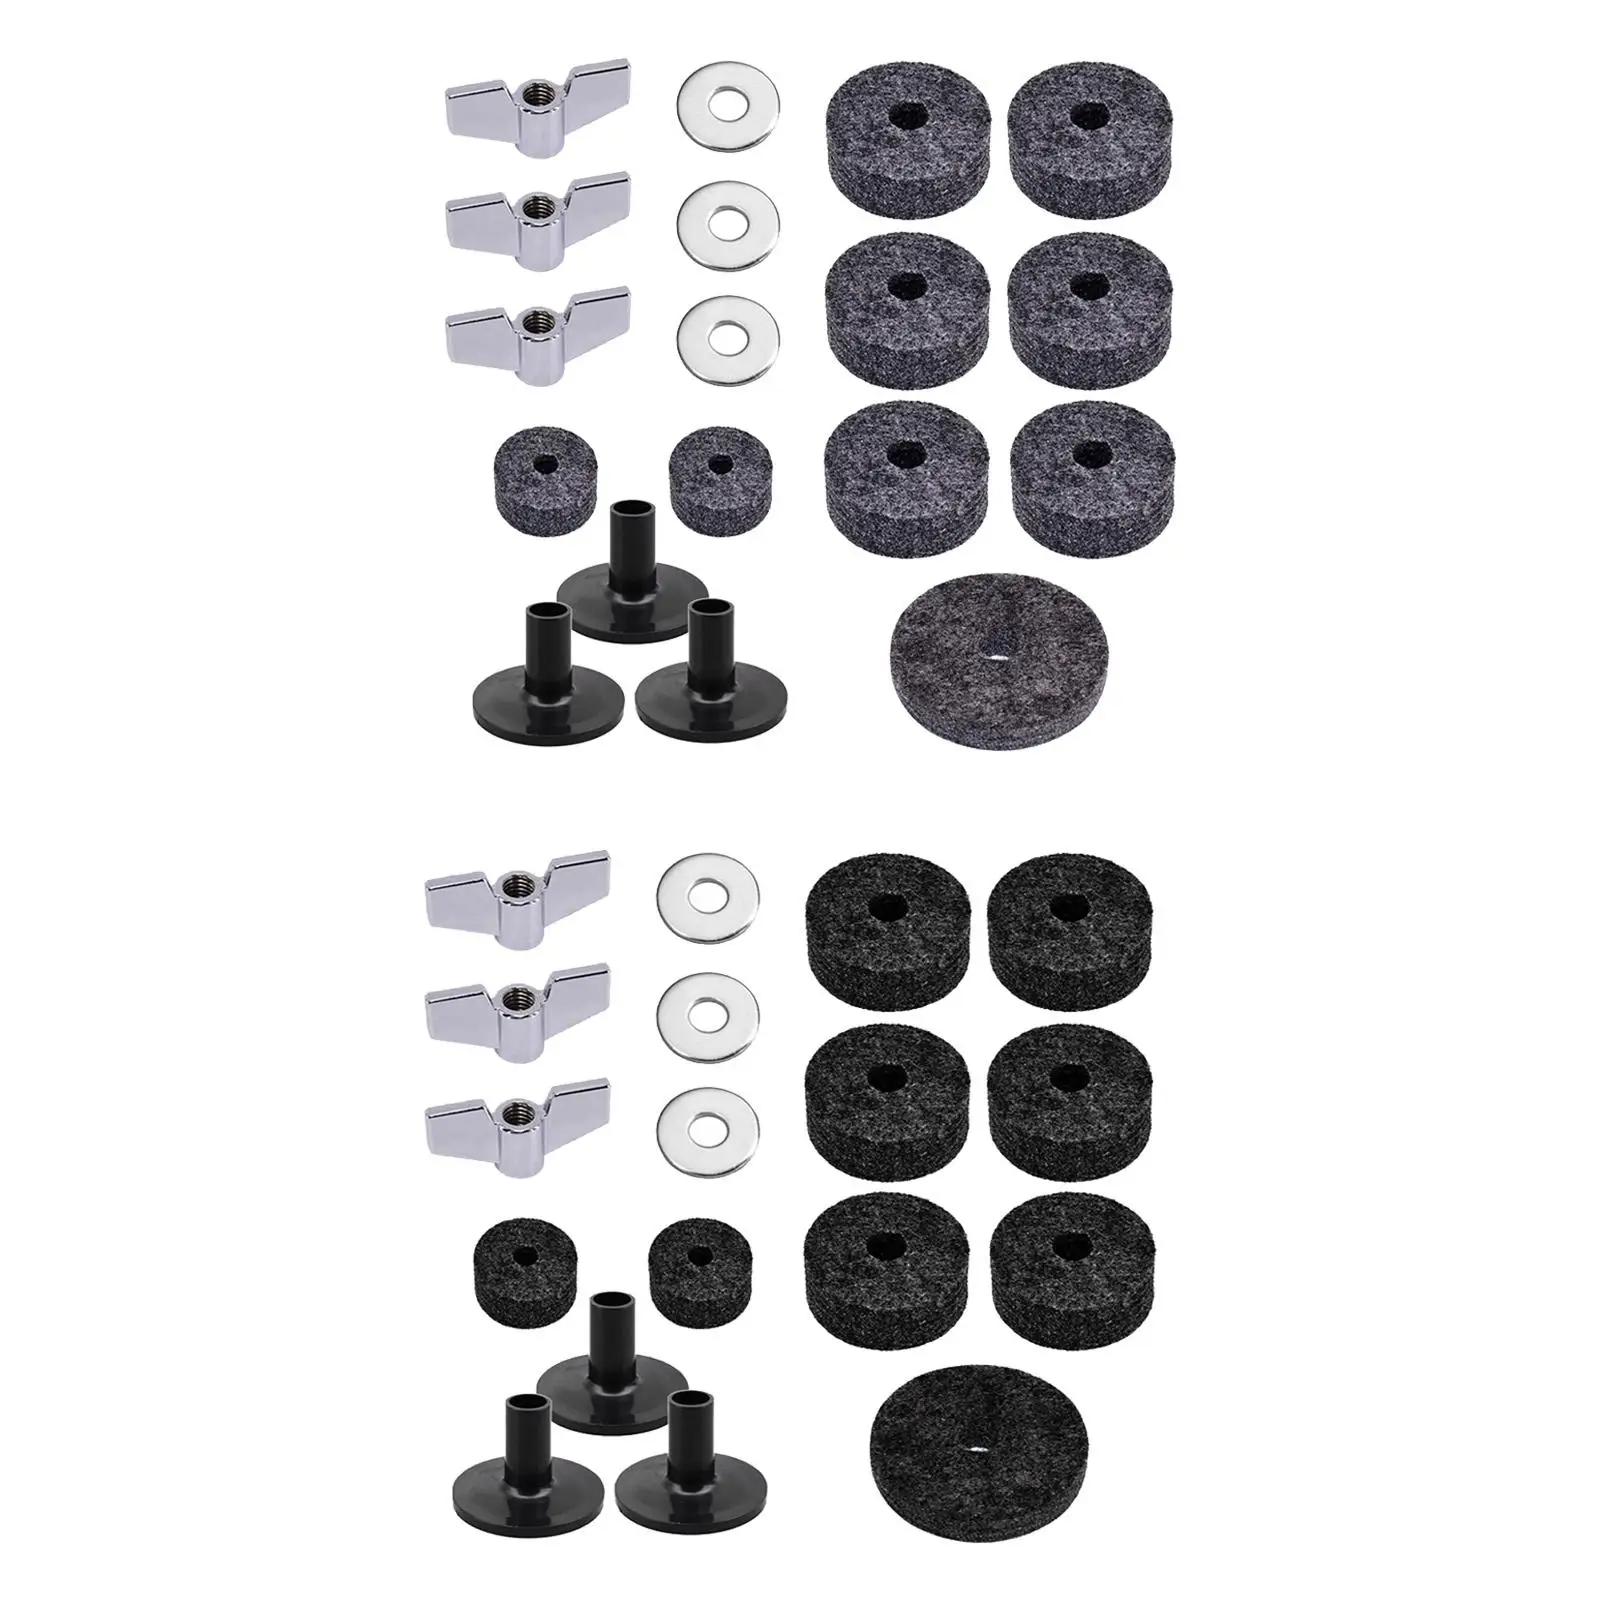 Drum Replacement Parts, Cymbal Felt Washer Drum Accessories, Attachment Drum Sets Replacement, for Music Stage Performer